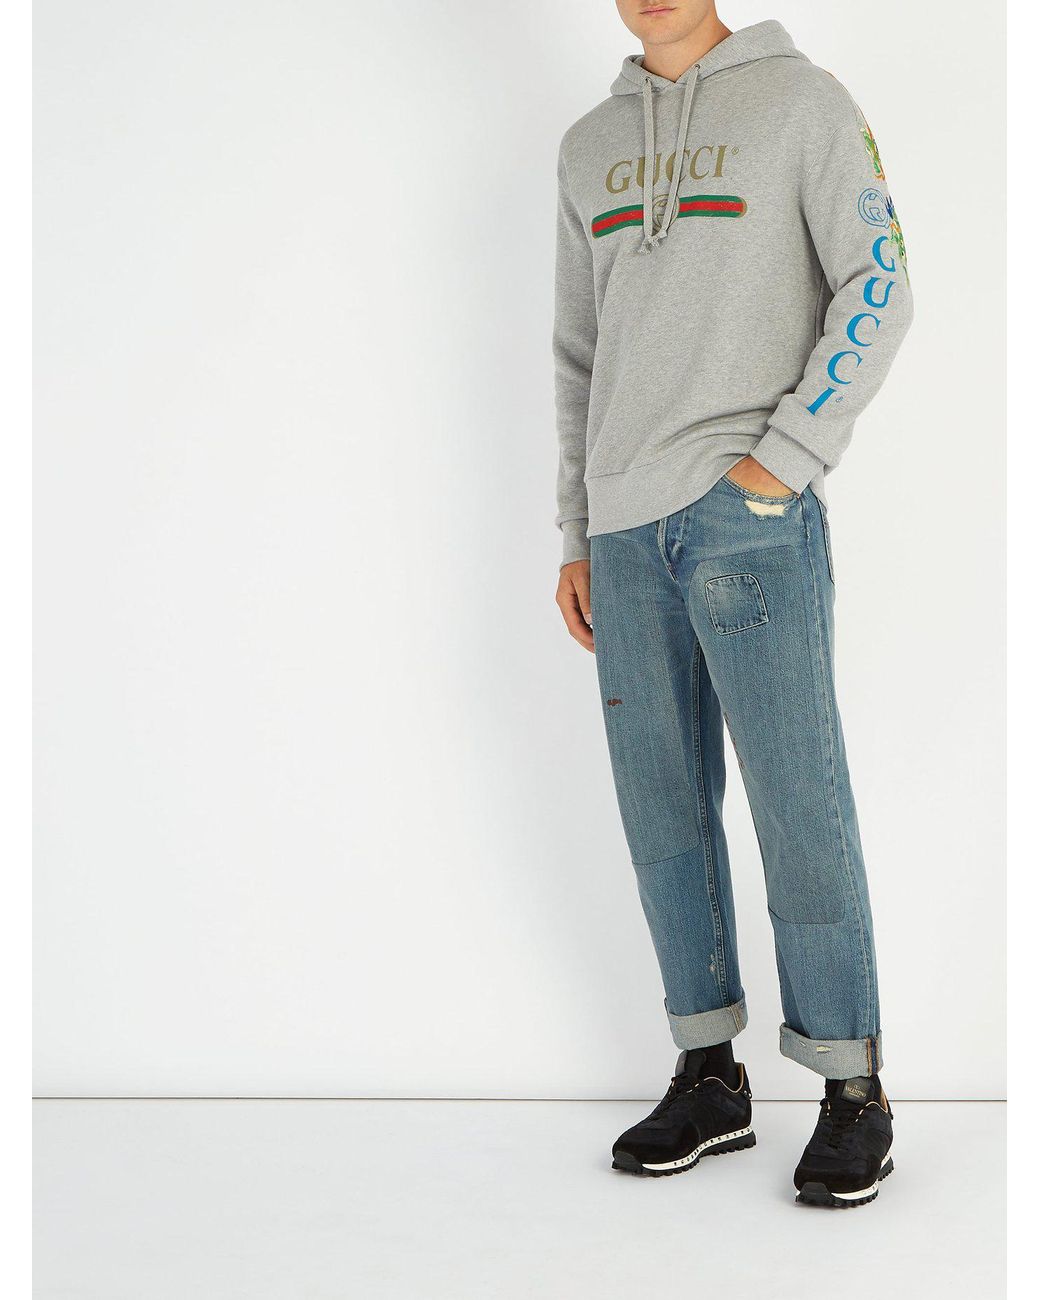 Gucci Dragon And Logo Hooded Sweatshirt in Gray for Men | Lyst